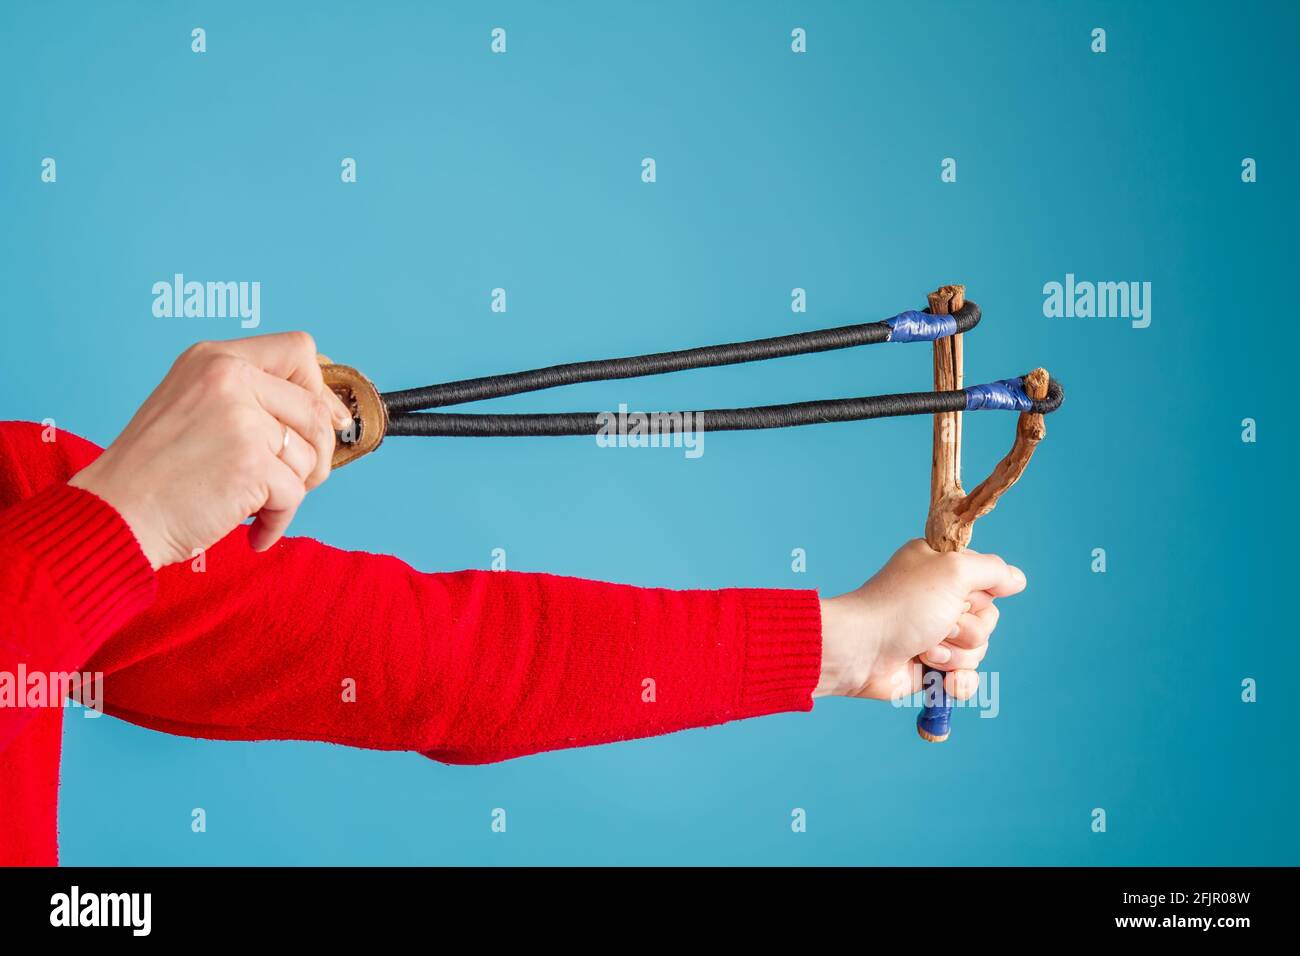 Hands of an adult man who holds a huge homemade slingshot ready to shoot Stock Photo